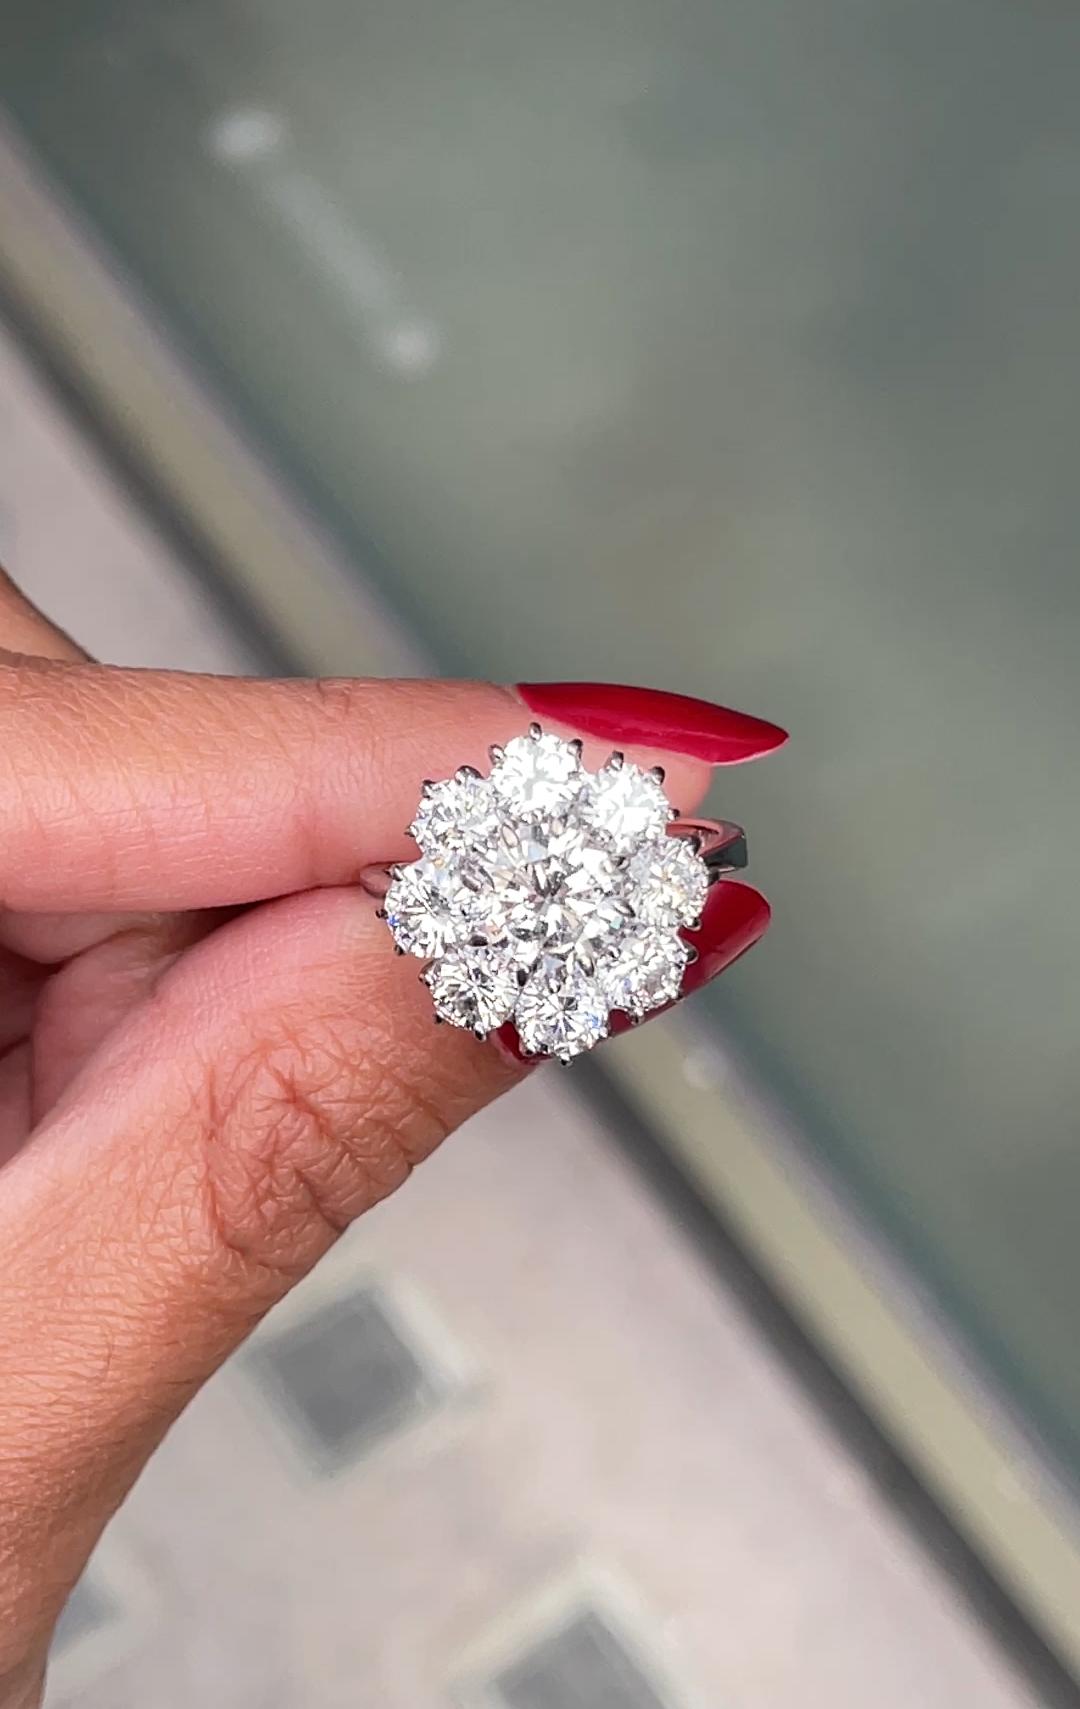 This absolutely stunning 8x1 diamond cluster ring is set with a 1.53 carat round brilliant cut diamond mounted in an 8 claw, open back setting. Surrounding the centrepiece diamond are a constellation of diamonds, forming a cluster that accentuates